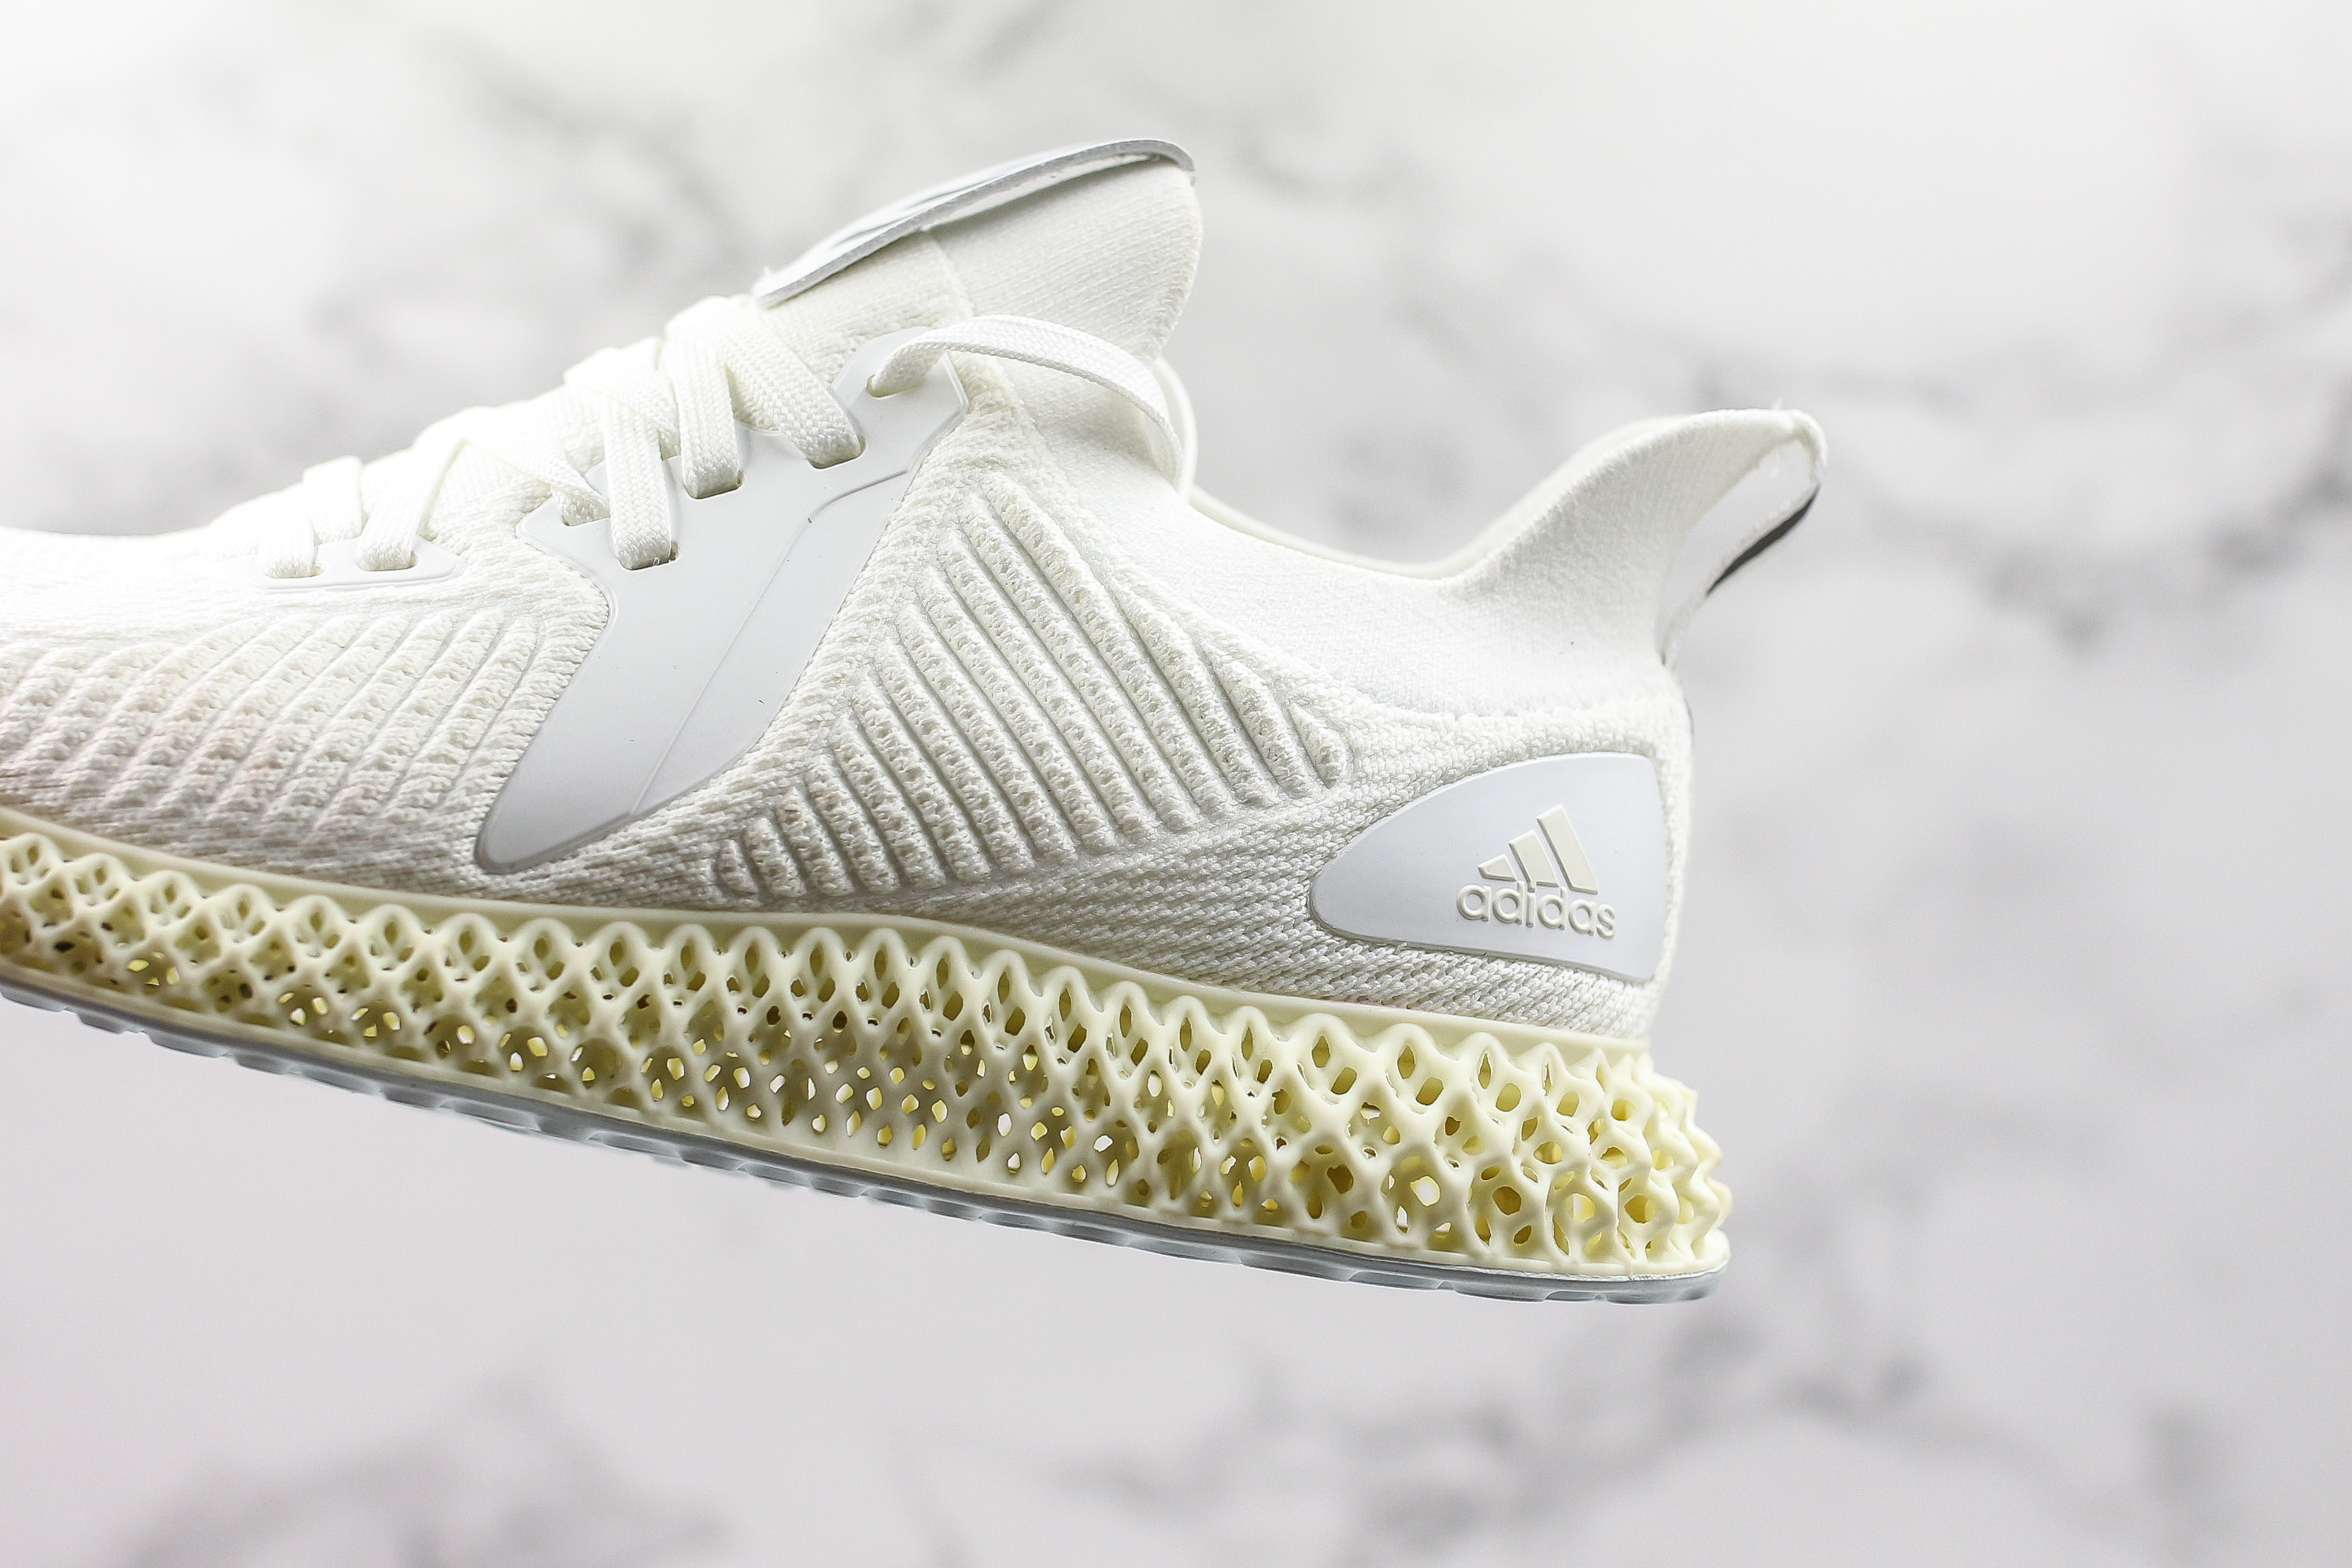 adidas Alphaedge 4D White Pearl For Sale – The Sole Line